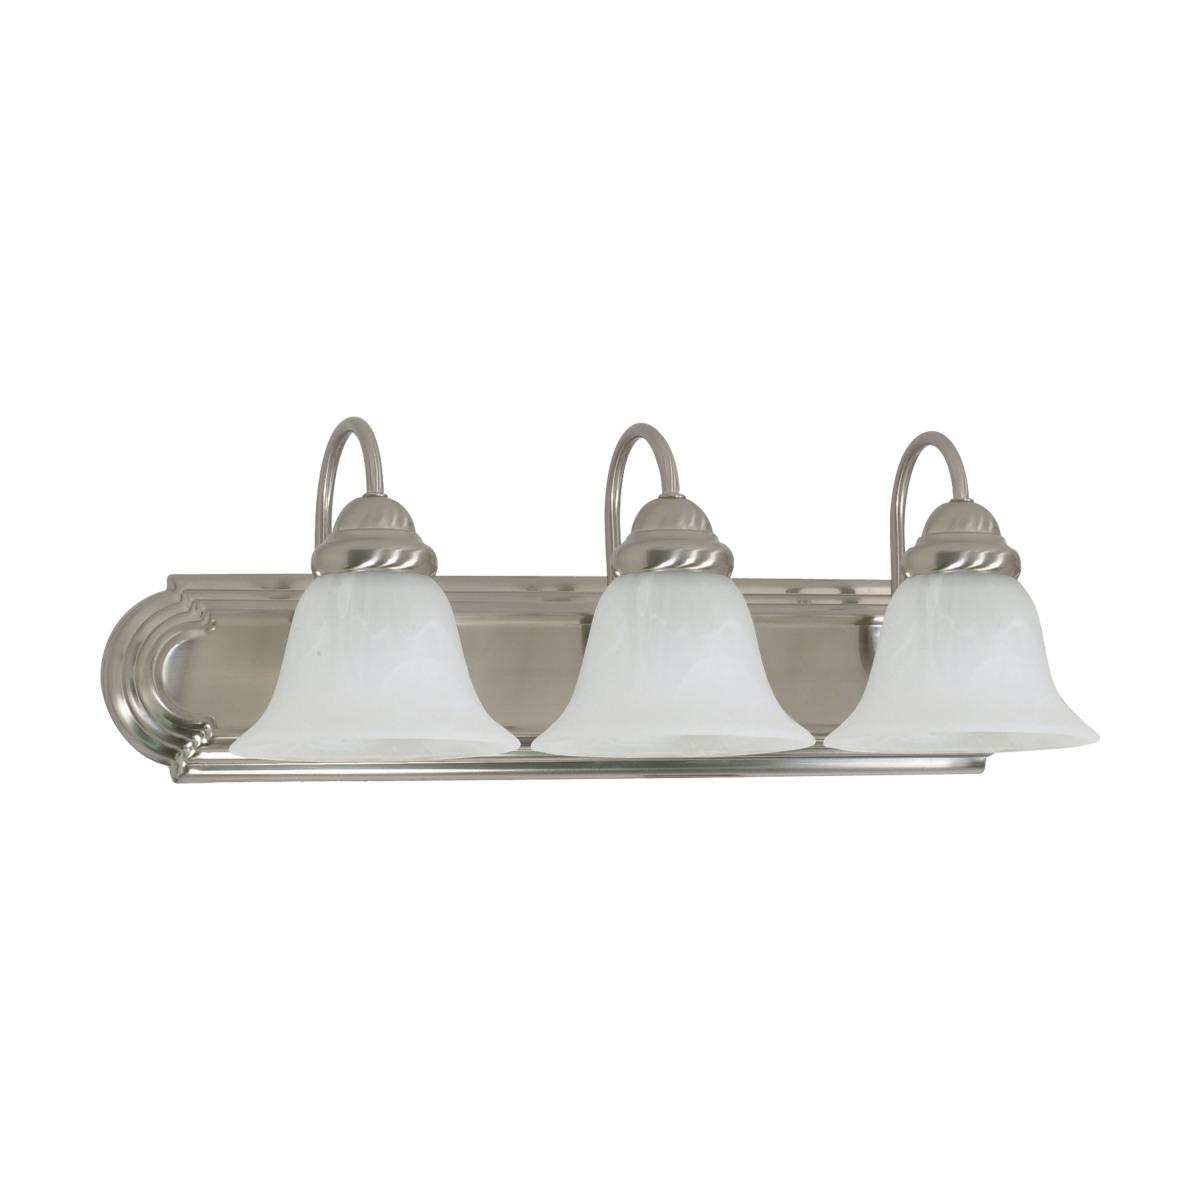 Nuvo 60-5381 Wall Sconce in Brushed Nickel Finish with a Alabaster Glass Shade 